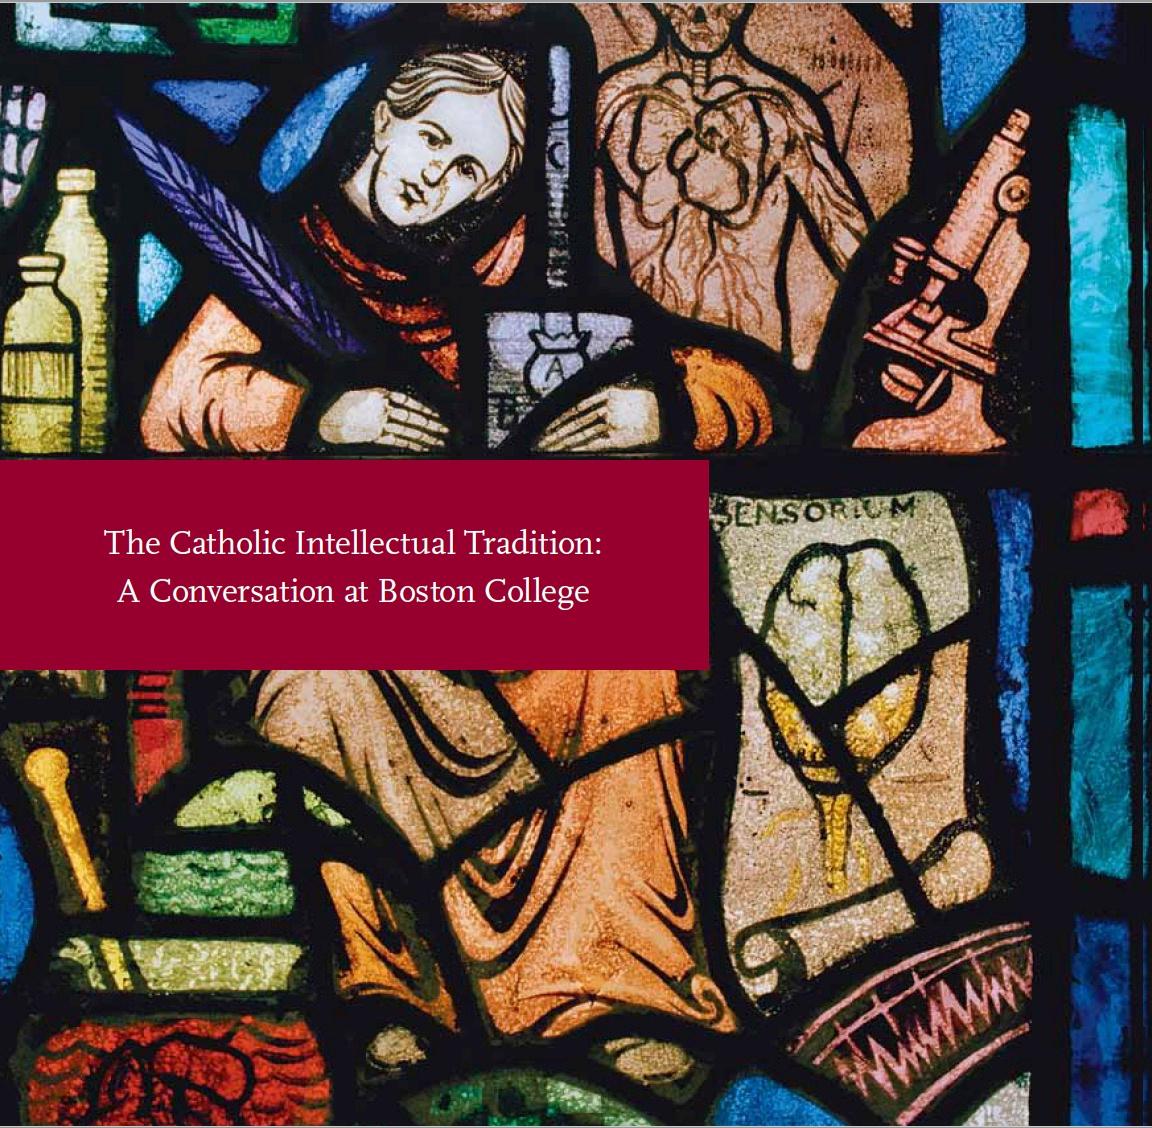 The Catholic Intellectual Tradition